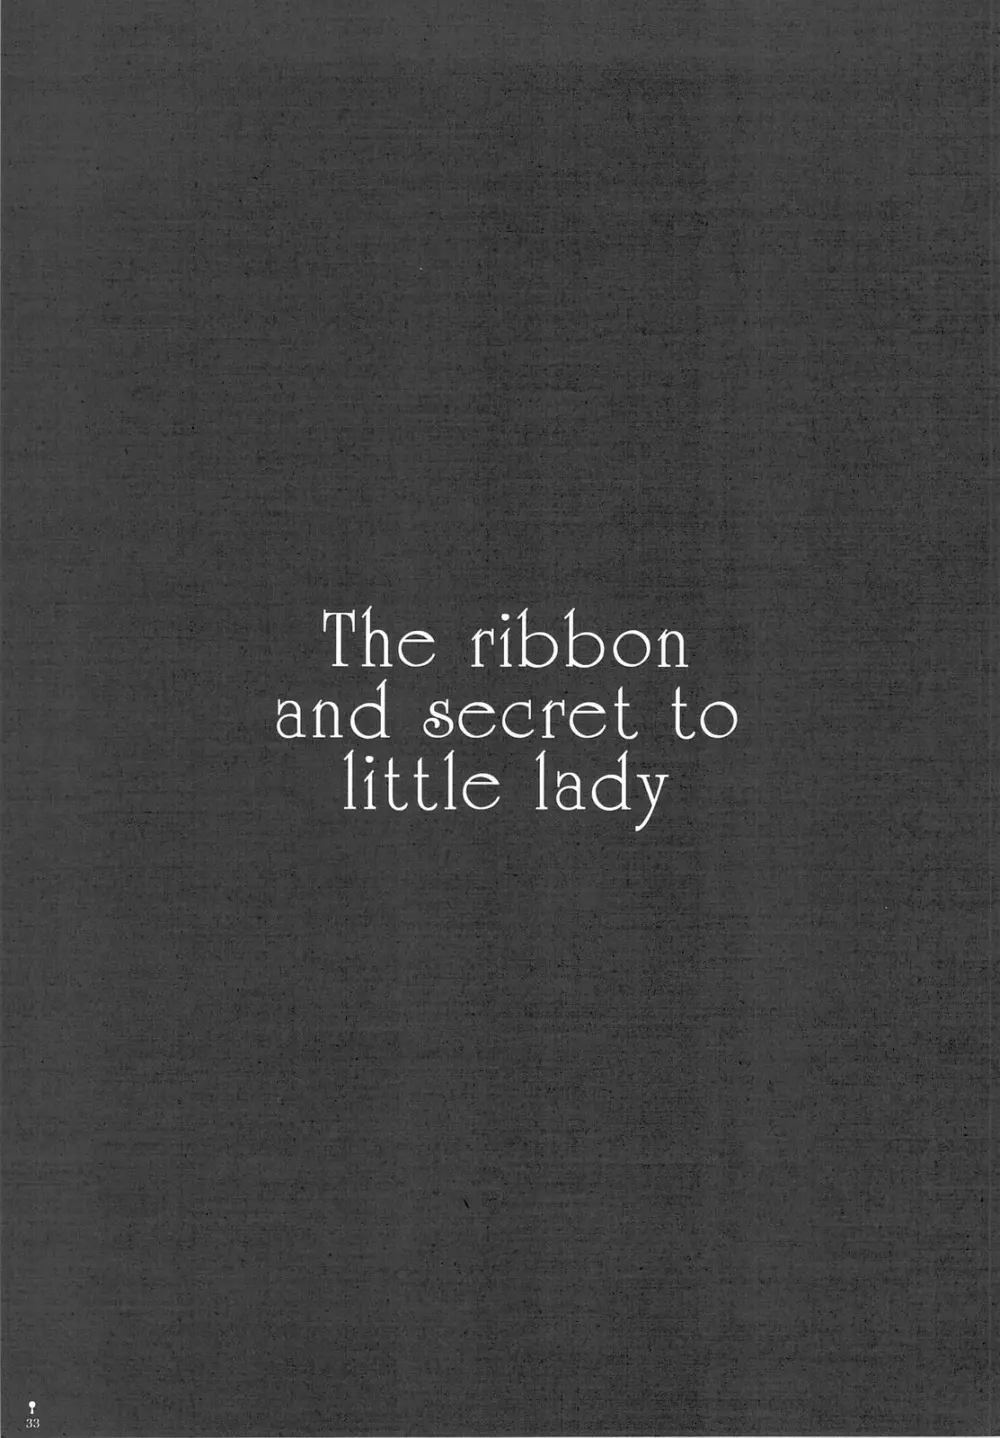 The ribbon and secret to little lady 35ページ